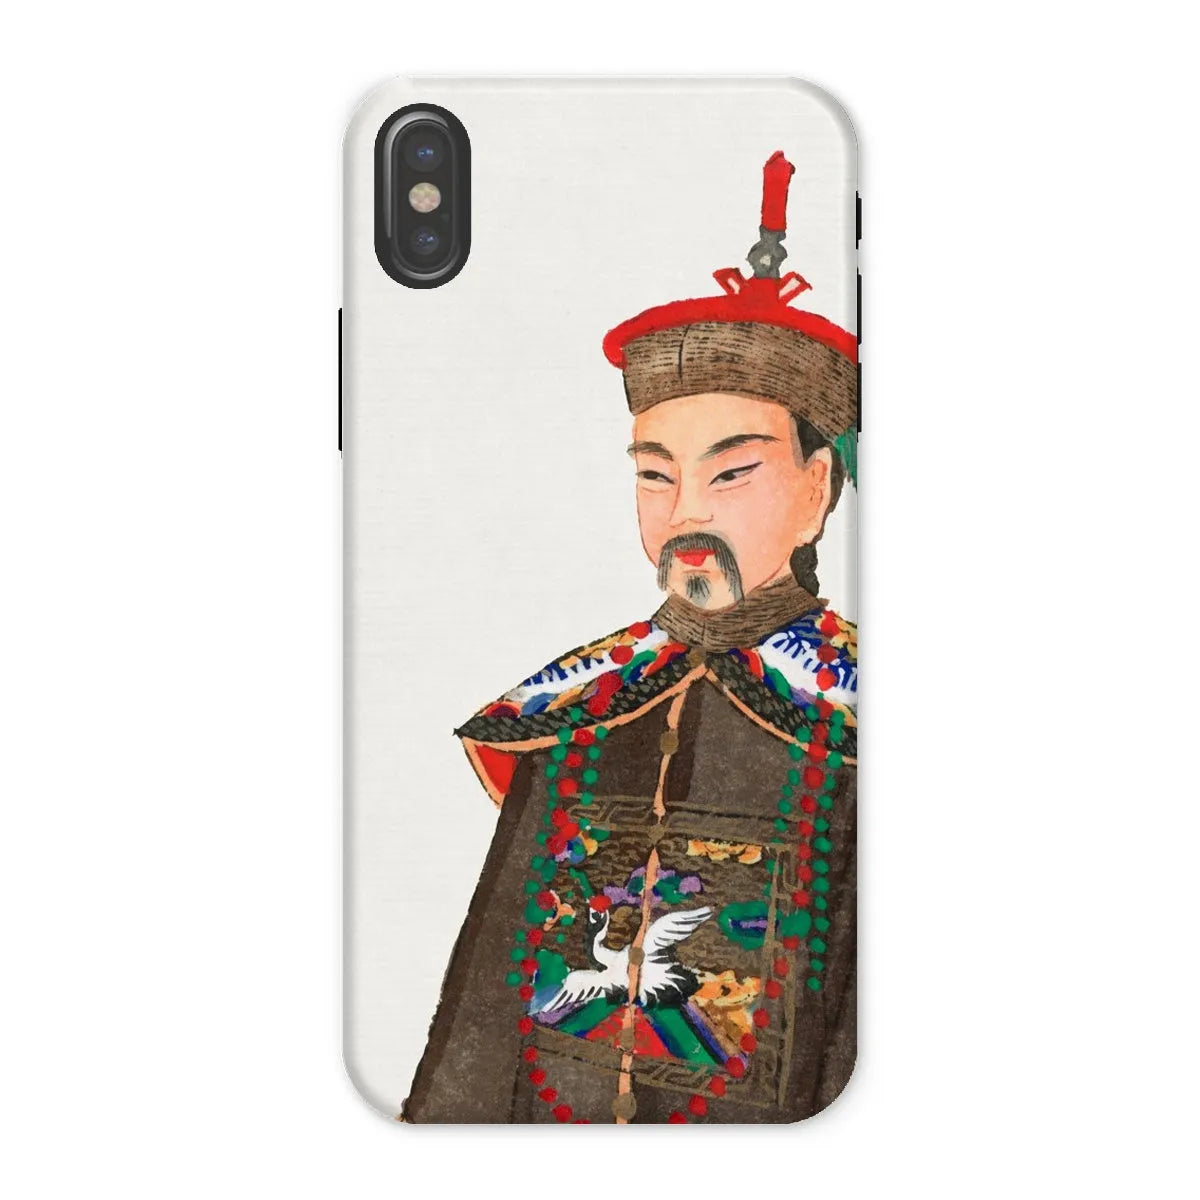 Nobleman At Court - Chinese Aesthetic Manchu Art Phone Case - Iphone x / Matte - Mobile Phone Cases - Aesthetic Art